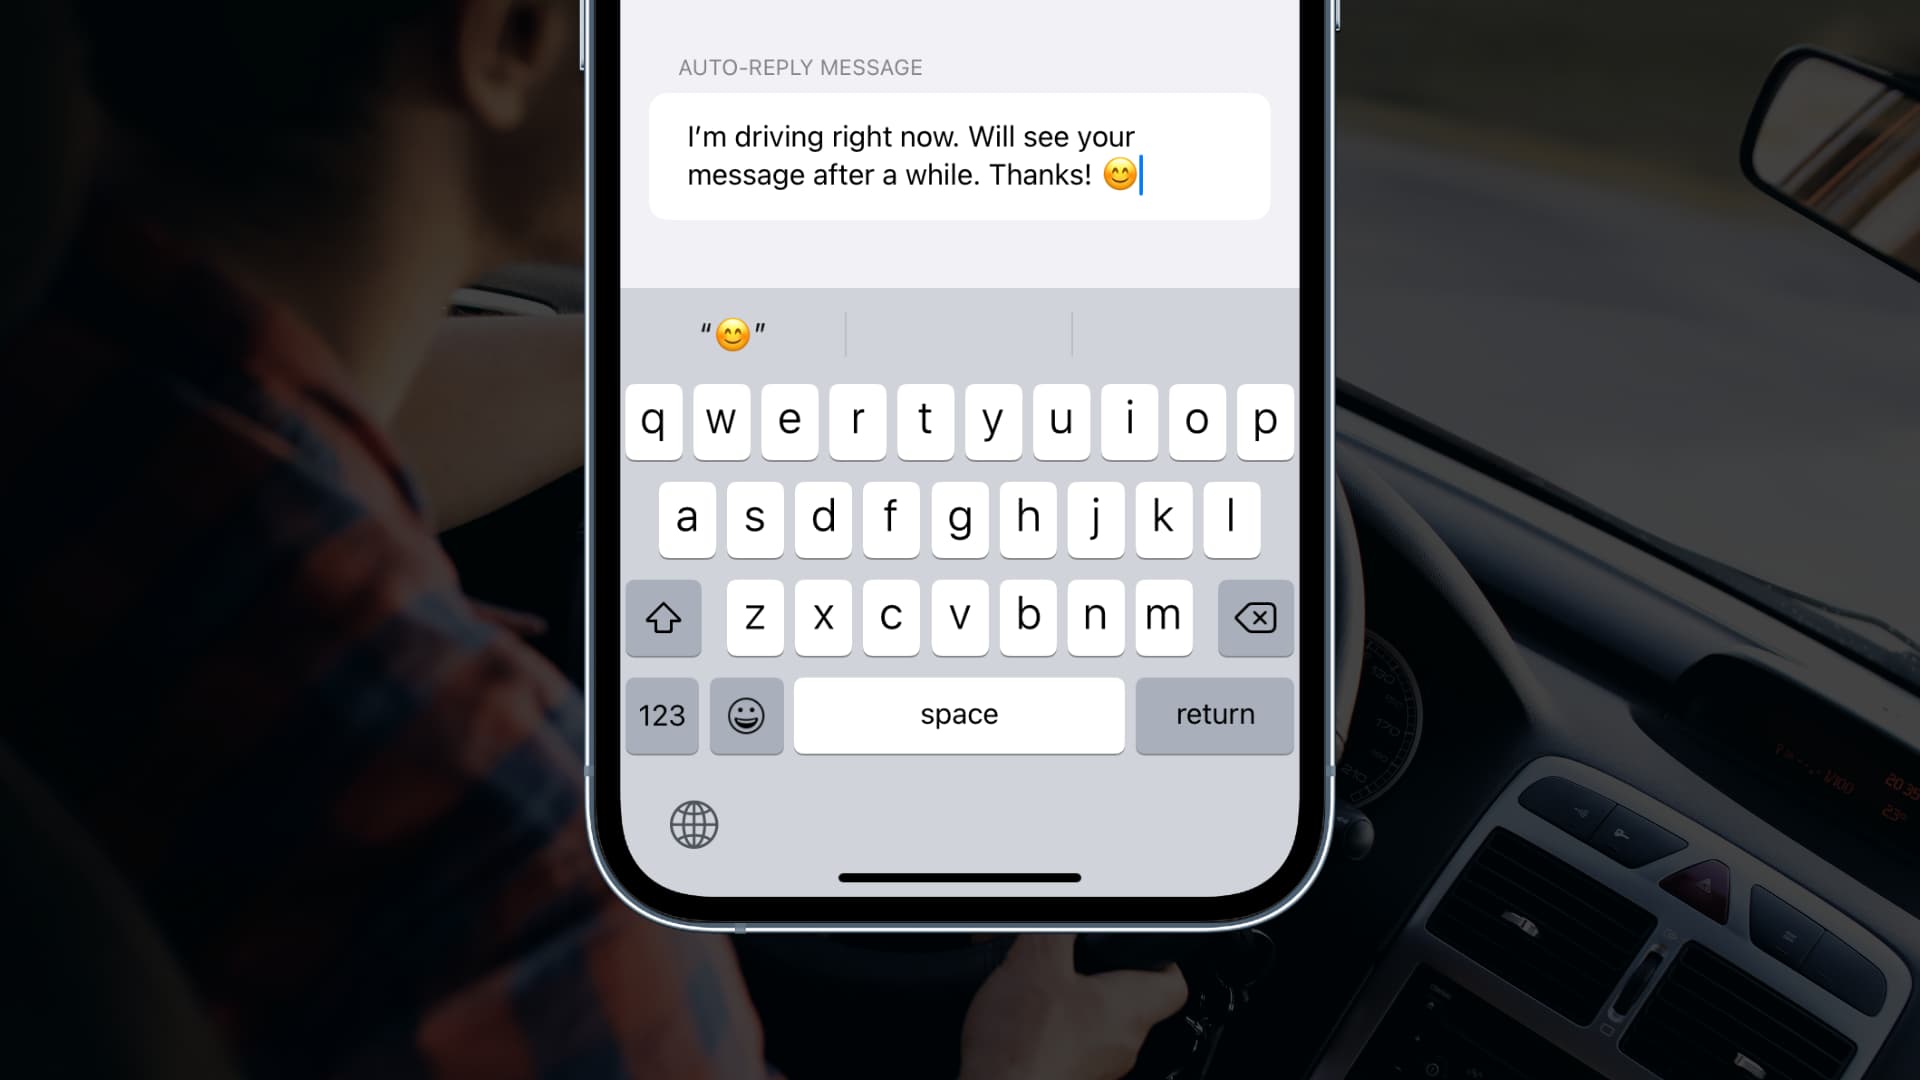 Driving Focus auto-reply response on iPhone